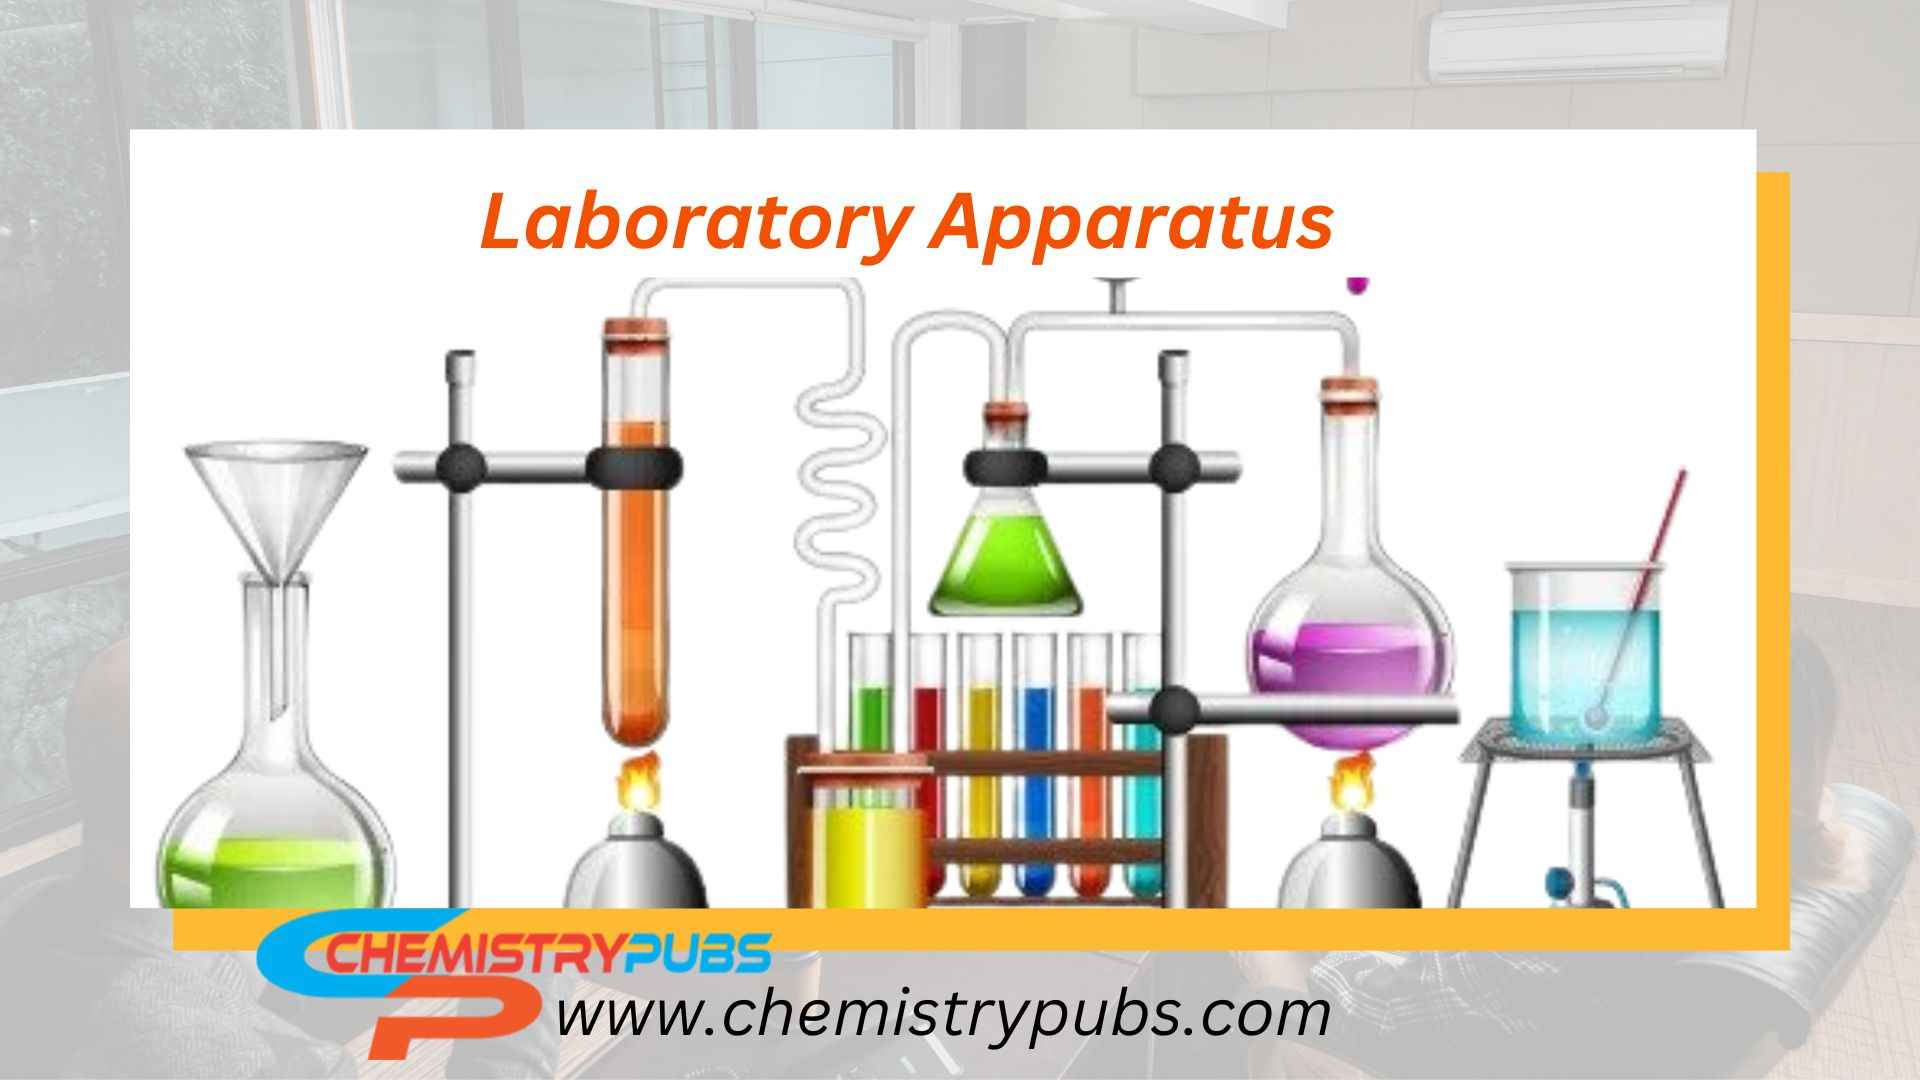 26 laboratory apparatus and their uses with pictures - Chemistrupubs